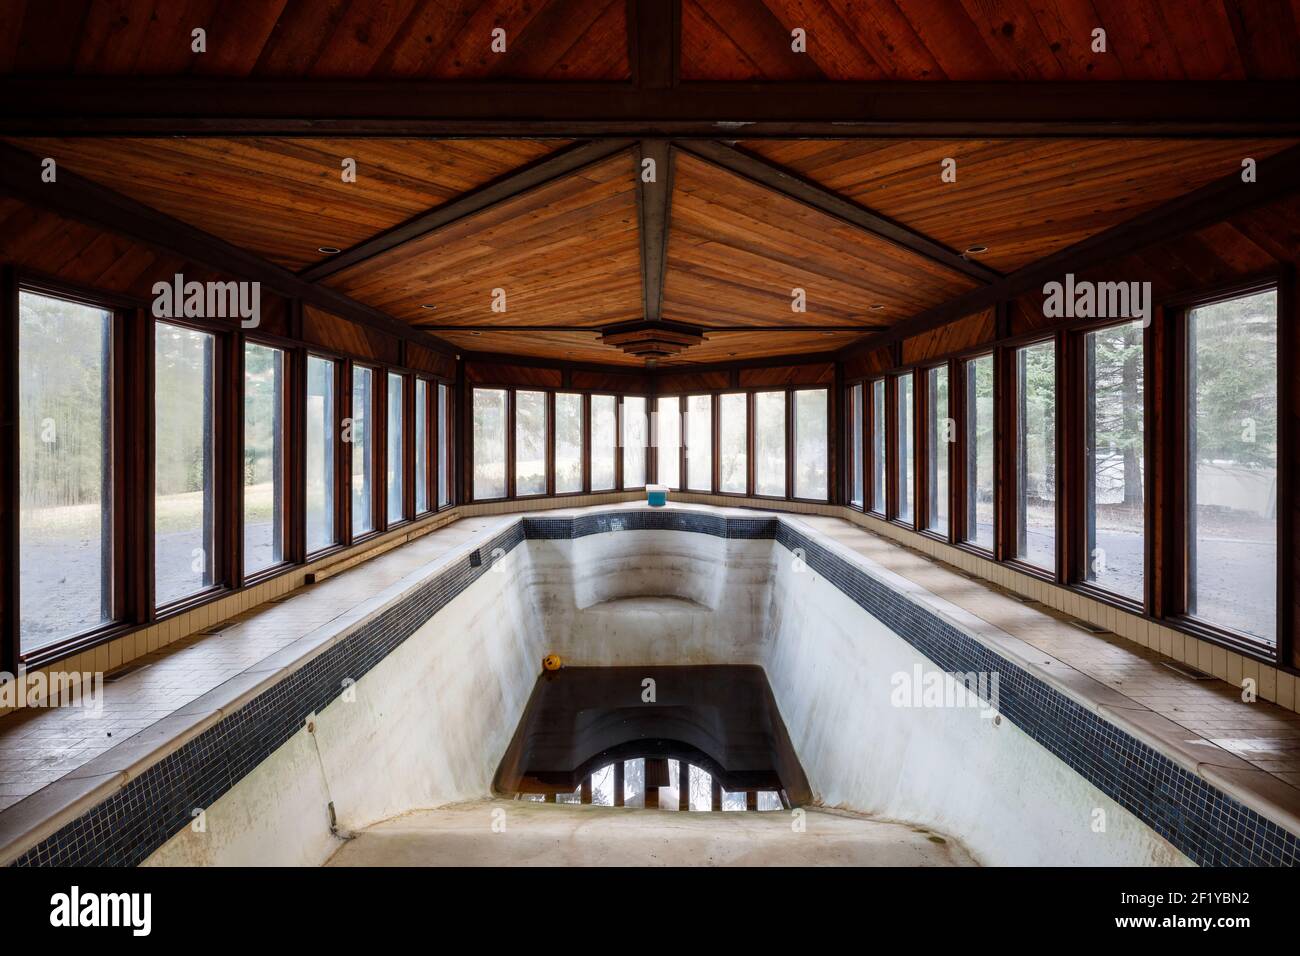 An indoor swimming pool filled with dirty water inside an abandoned mansion. Stock Photo